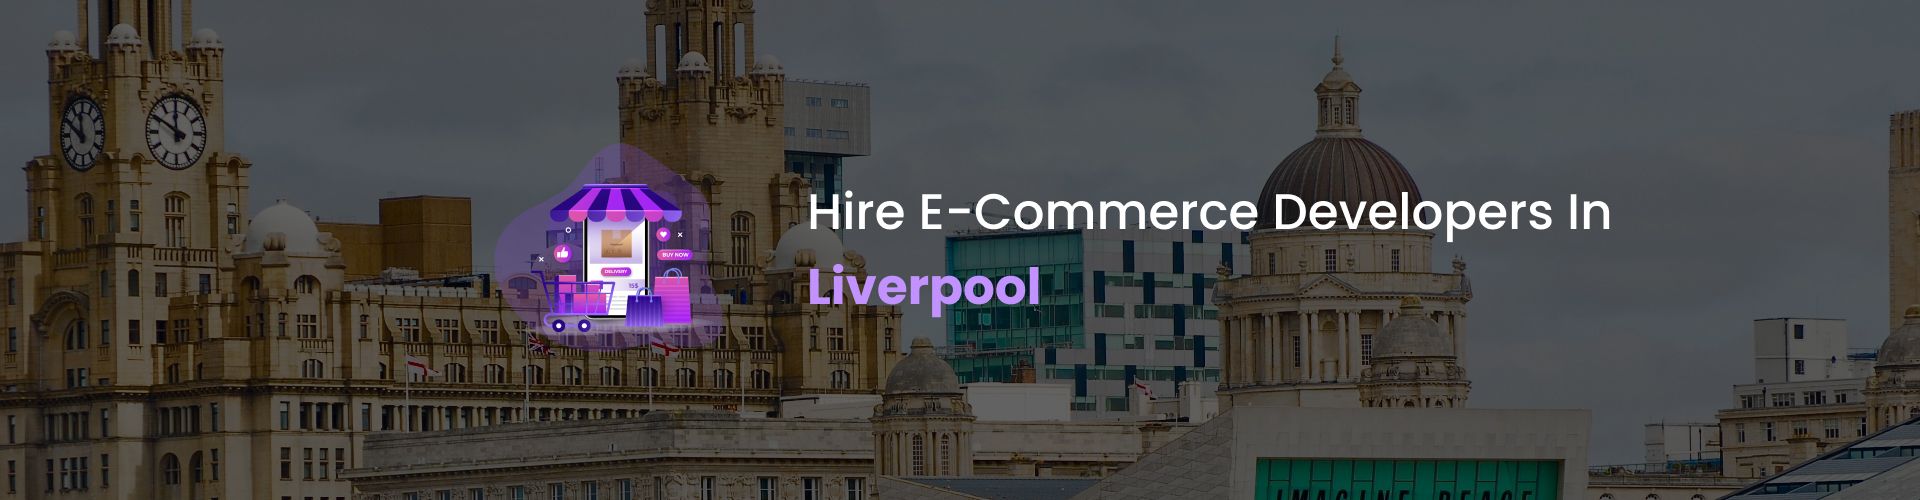 hire ecommerce developers in liverpool